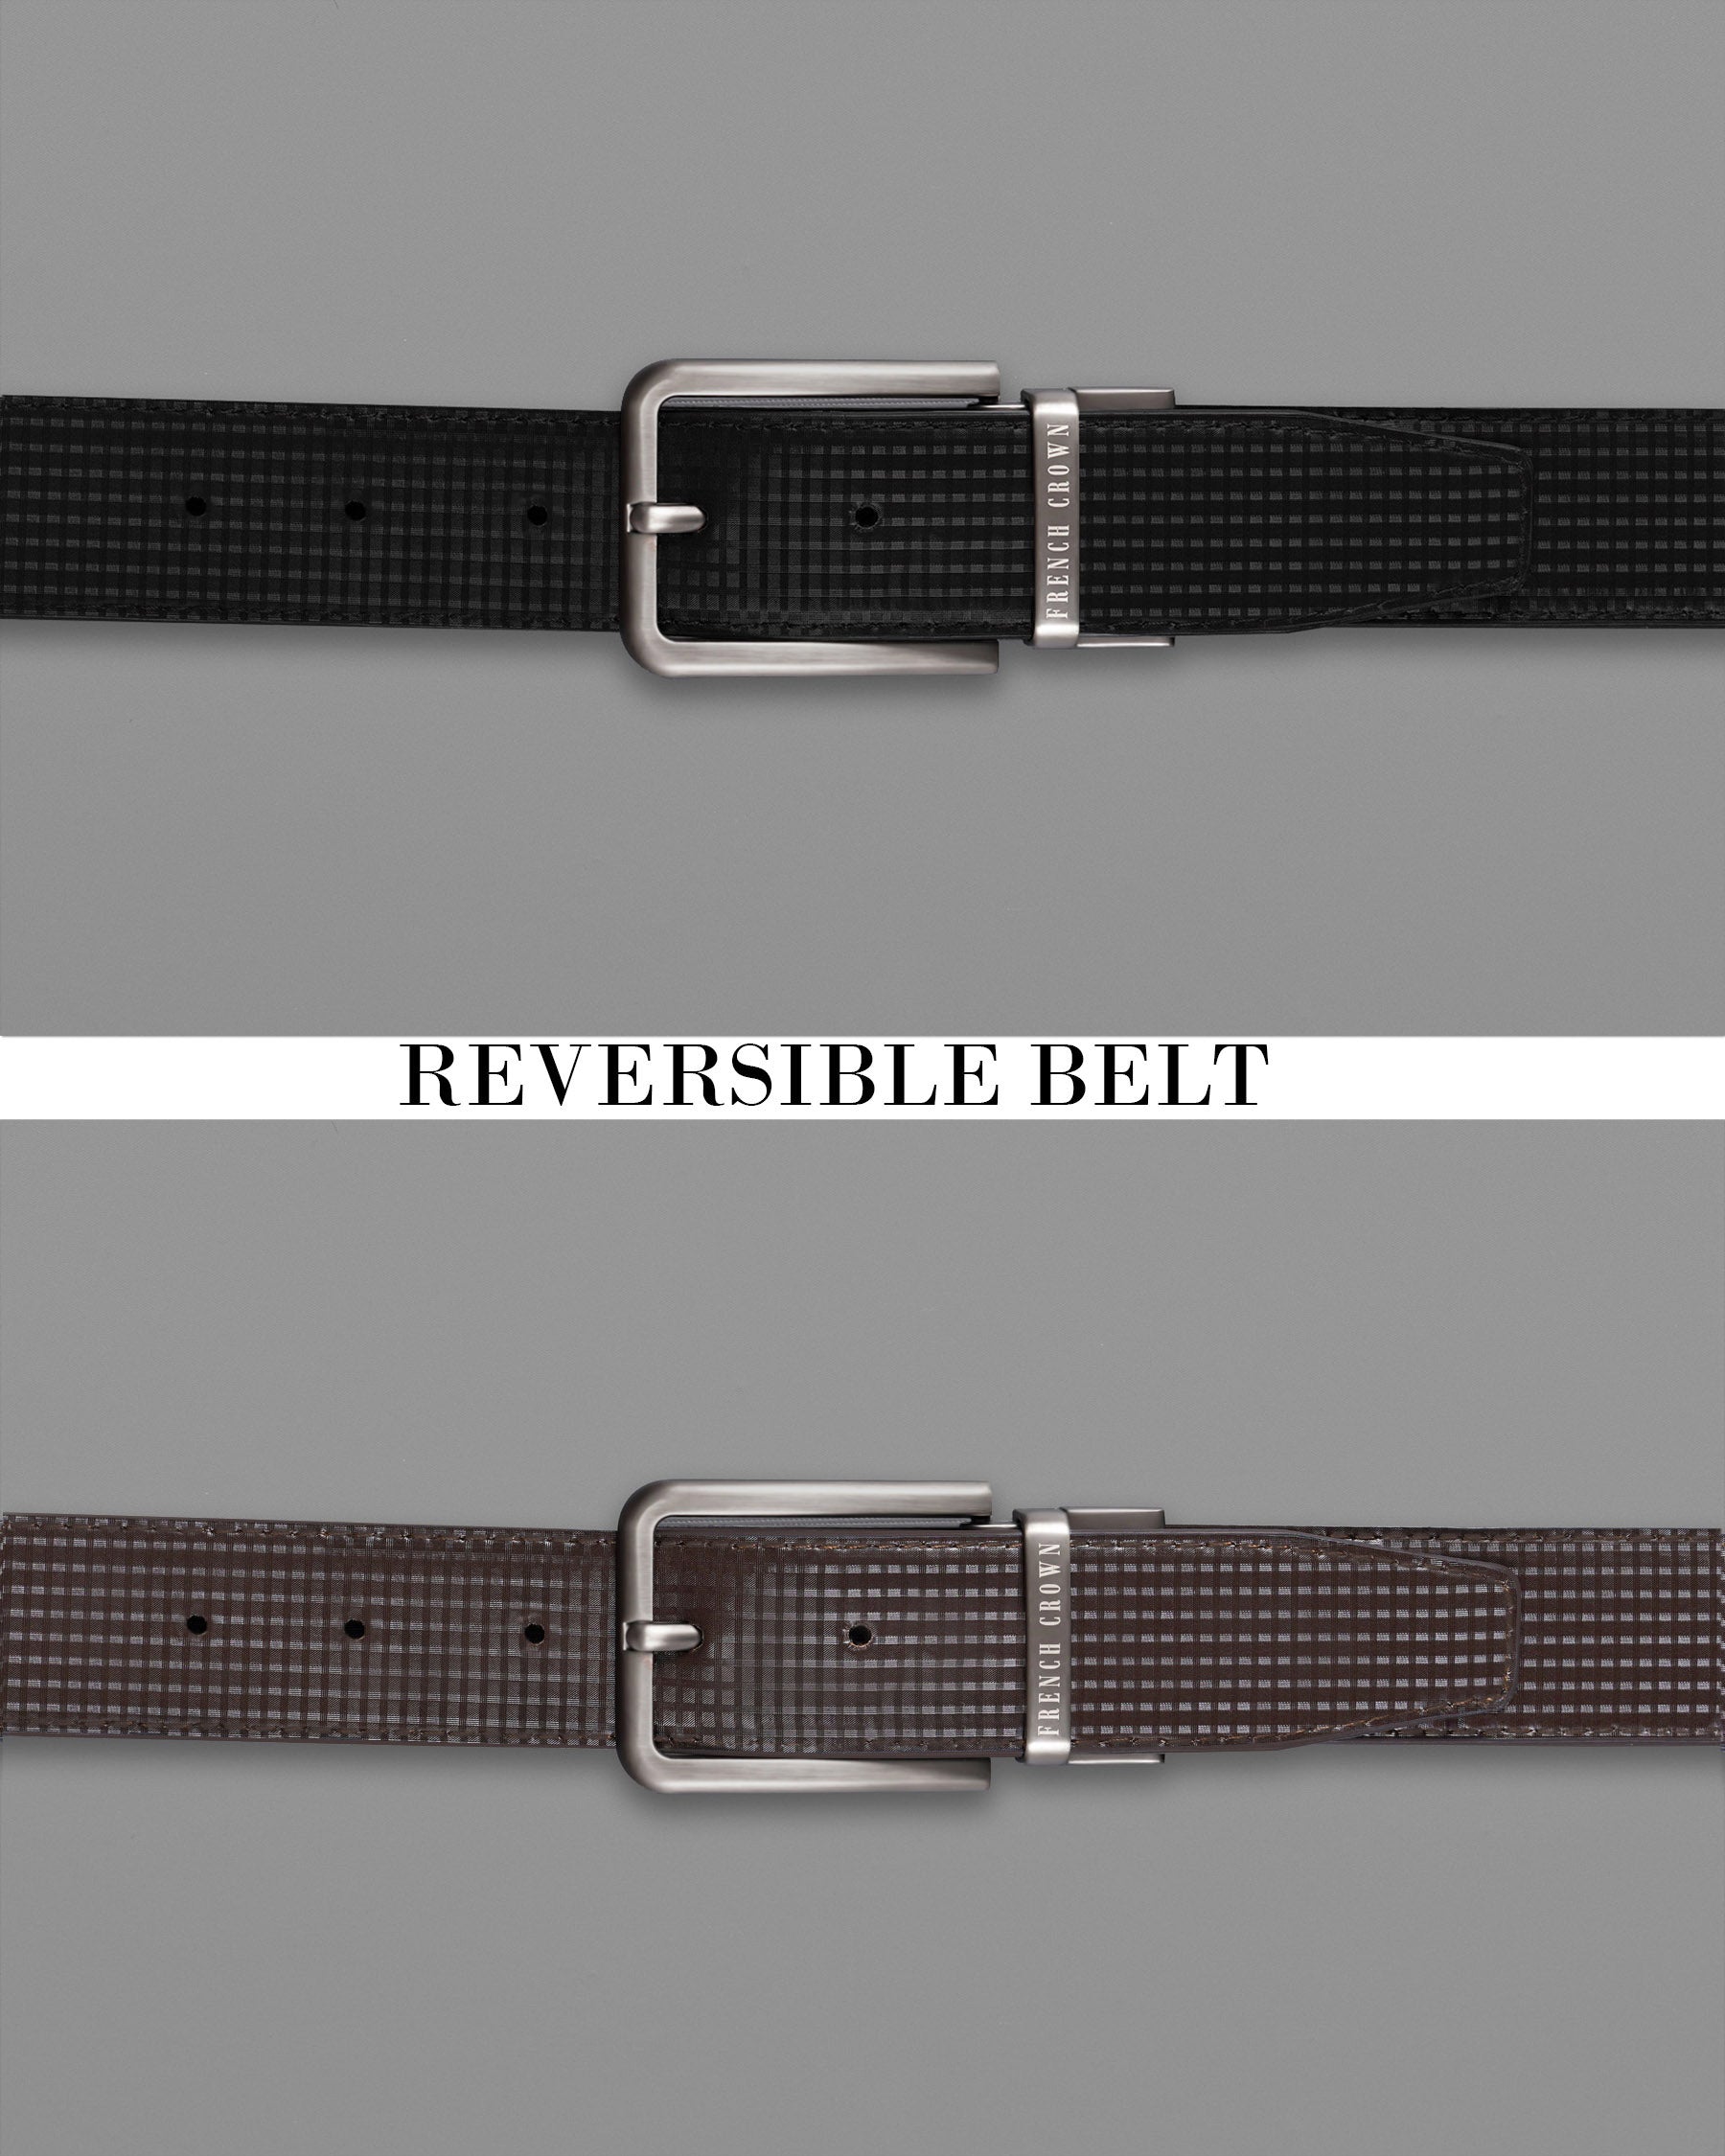 Silver Buckle Glossy Finish with Jade Black and Brown Leather Free Handcrafted Reversible Belt BT054-28, BT054-30, BT054-32, BT054-34, BT054-36, BT054-38